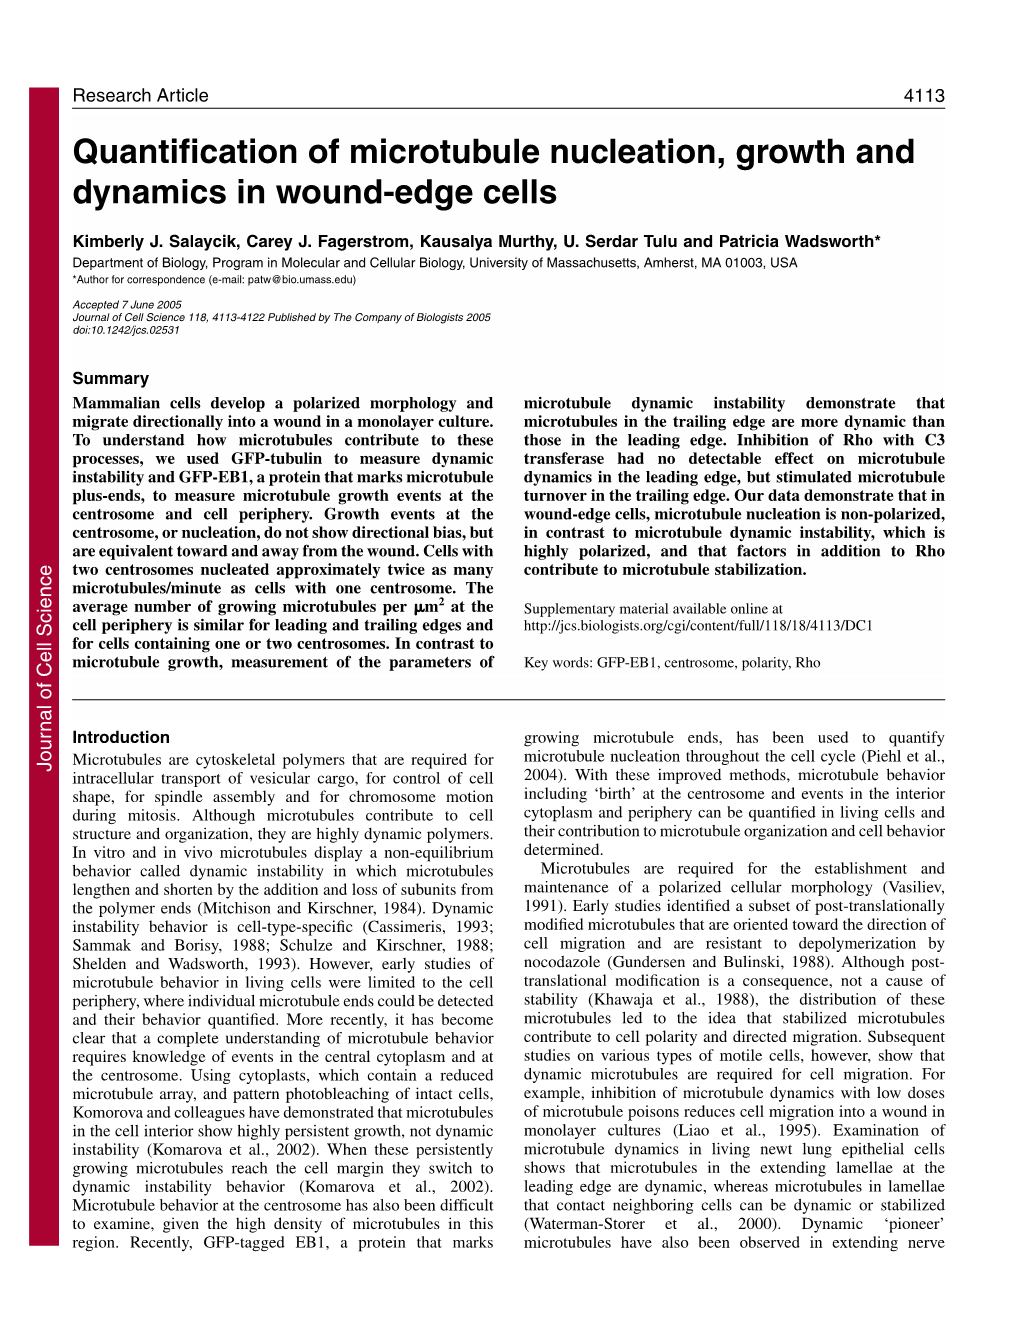 Quantification of Microtubule Nucleation, Growth and Dynamics in Wound-Edge Cells